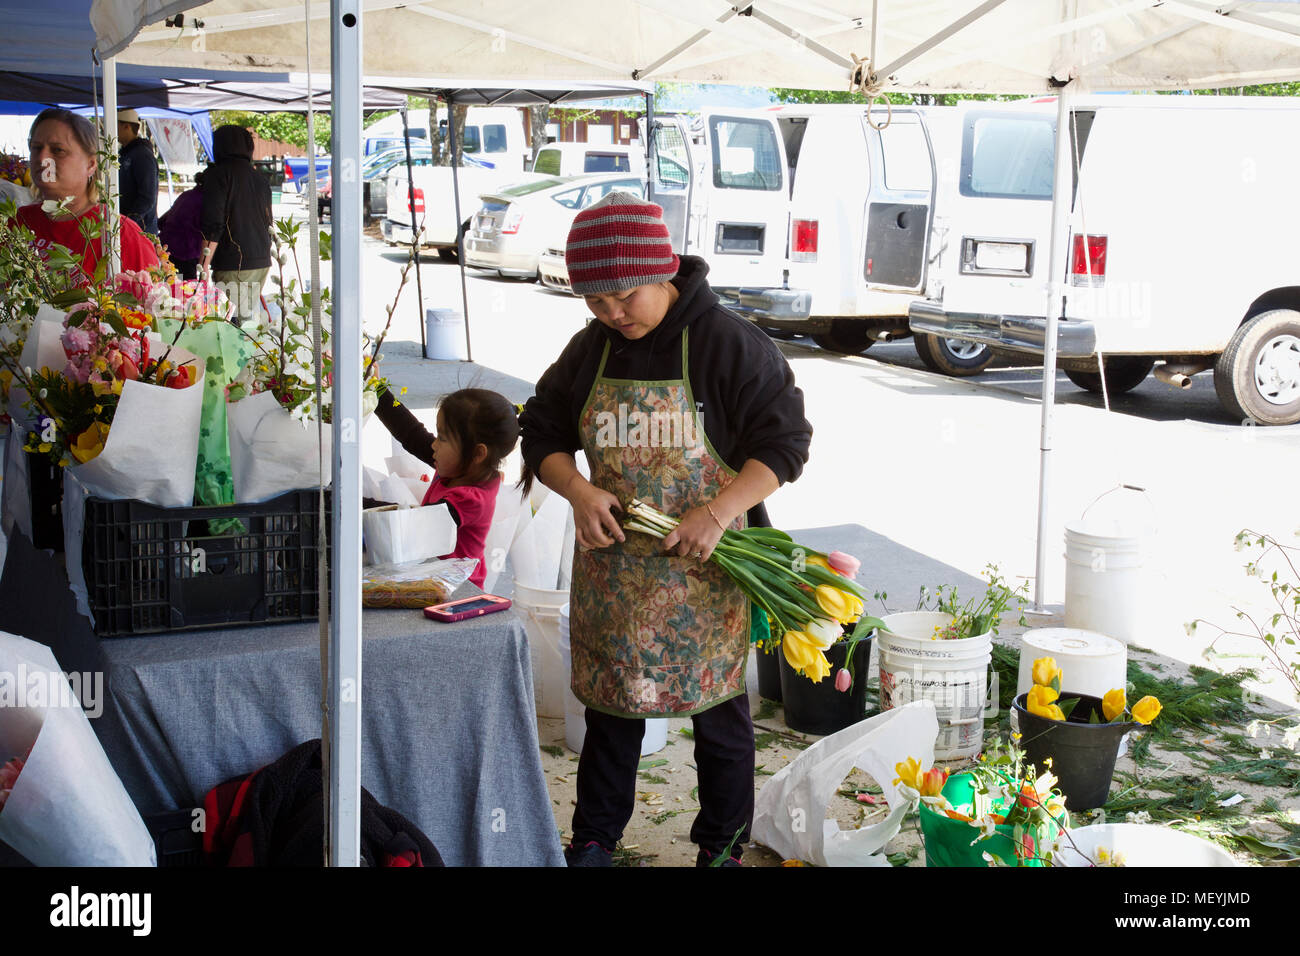 Woman making flower arrangements with young girl helping at the Piedmont Triad Farmers Market on 04212018 Stock Photo